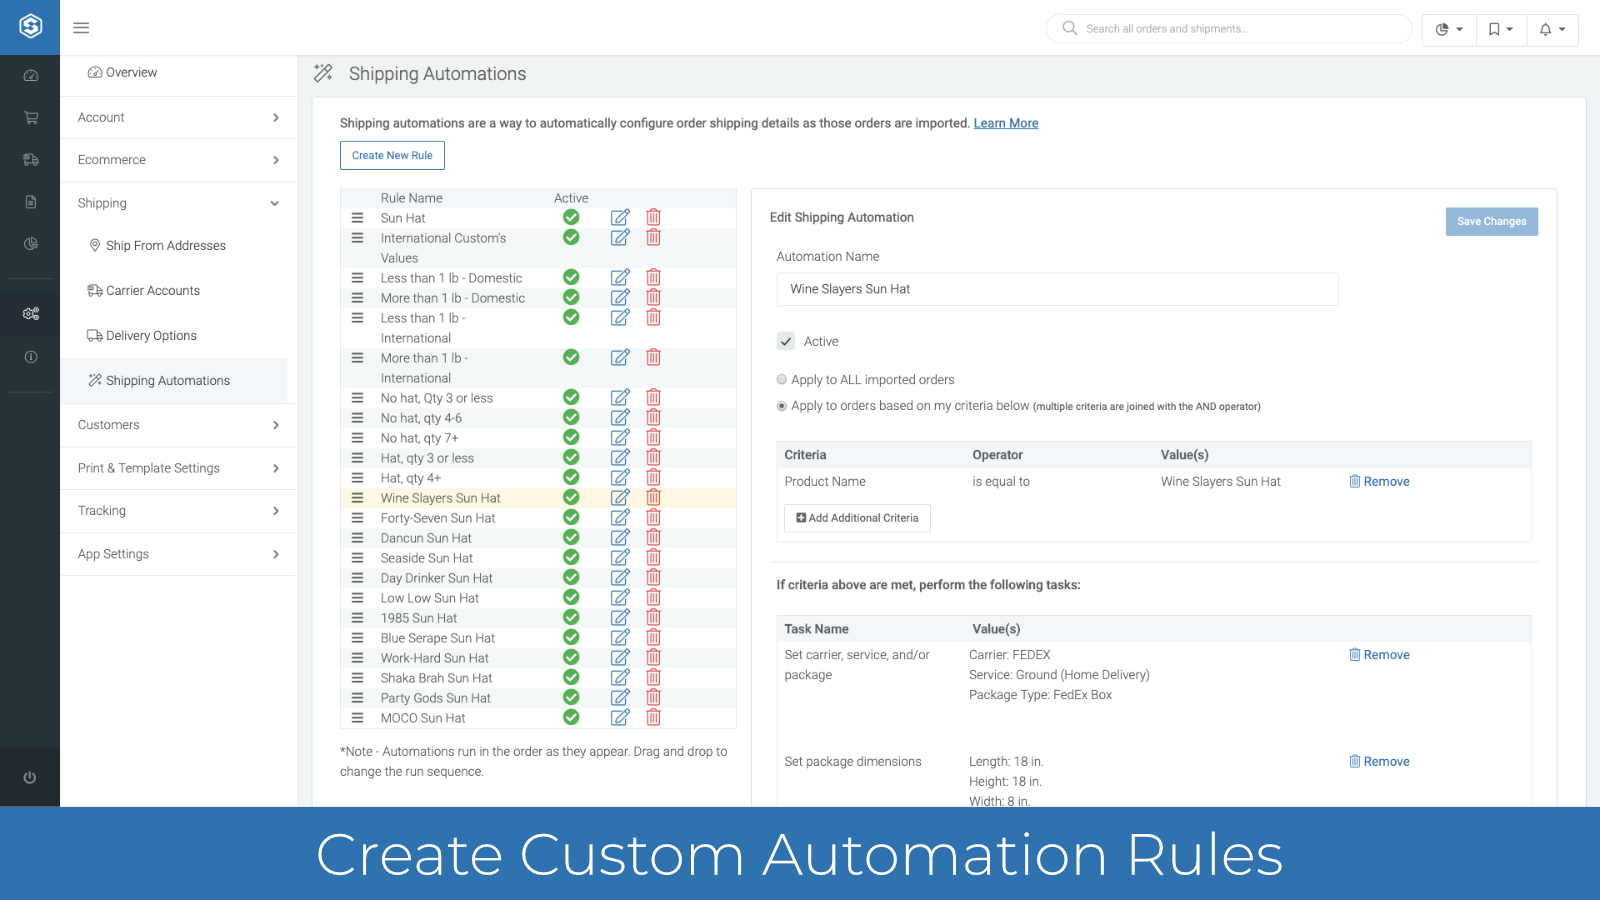 Create powerful automation rules to process orders faster.